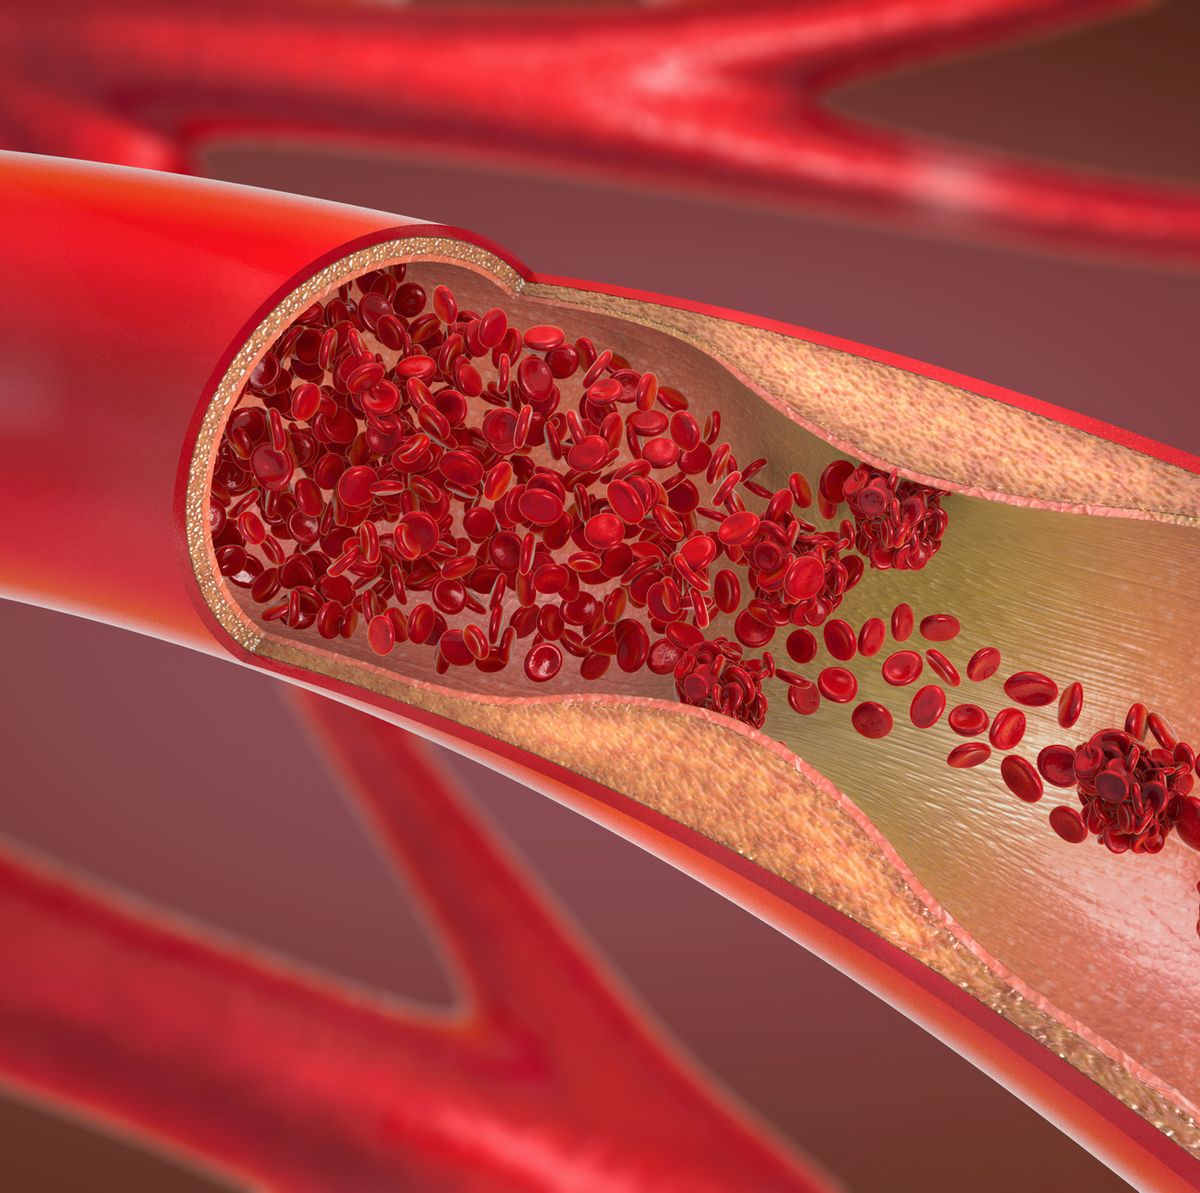 Period Blood Clots: Cause for Concern?